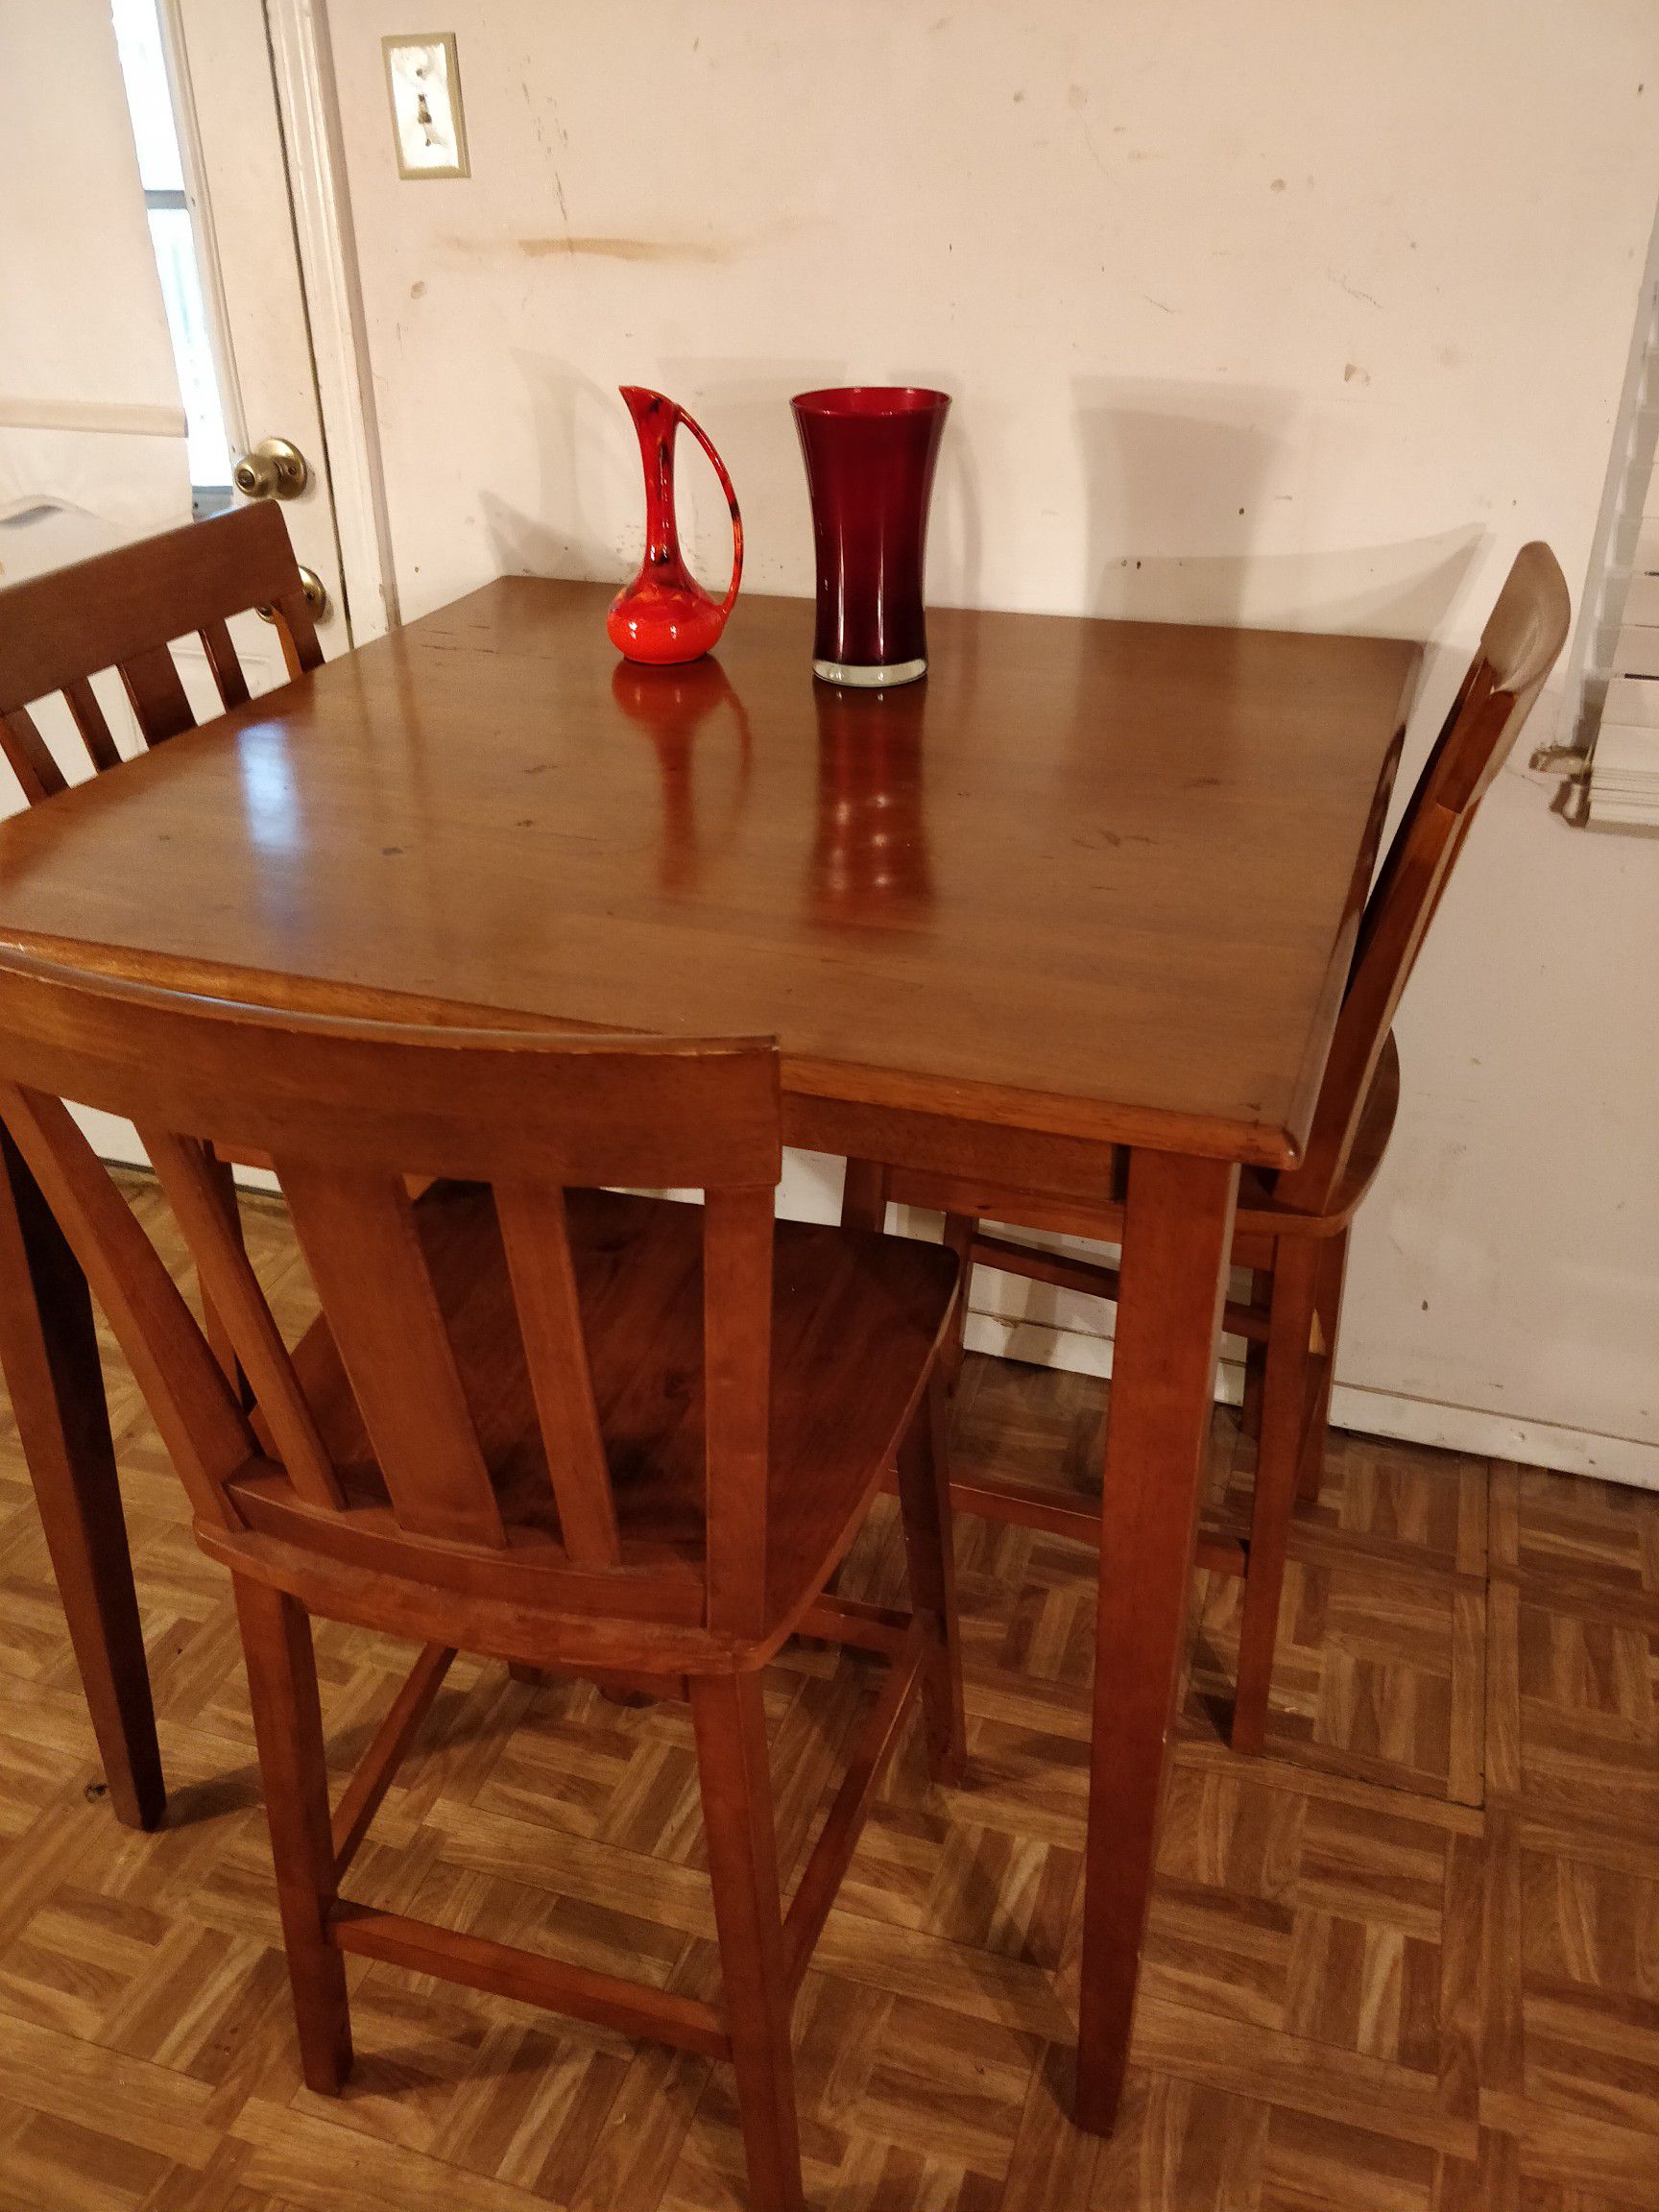 Nice solid wood dining table with 3 chairs in good condition. L38"*W38"*H38"